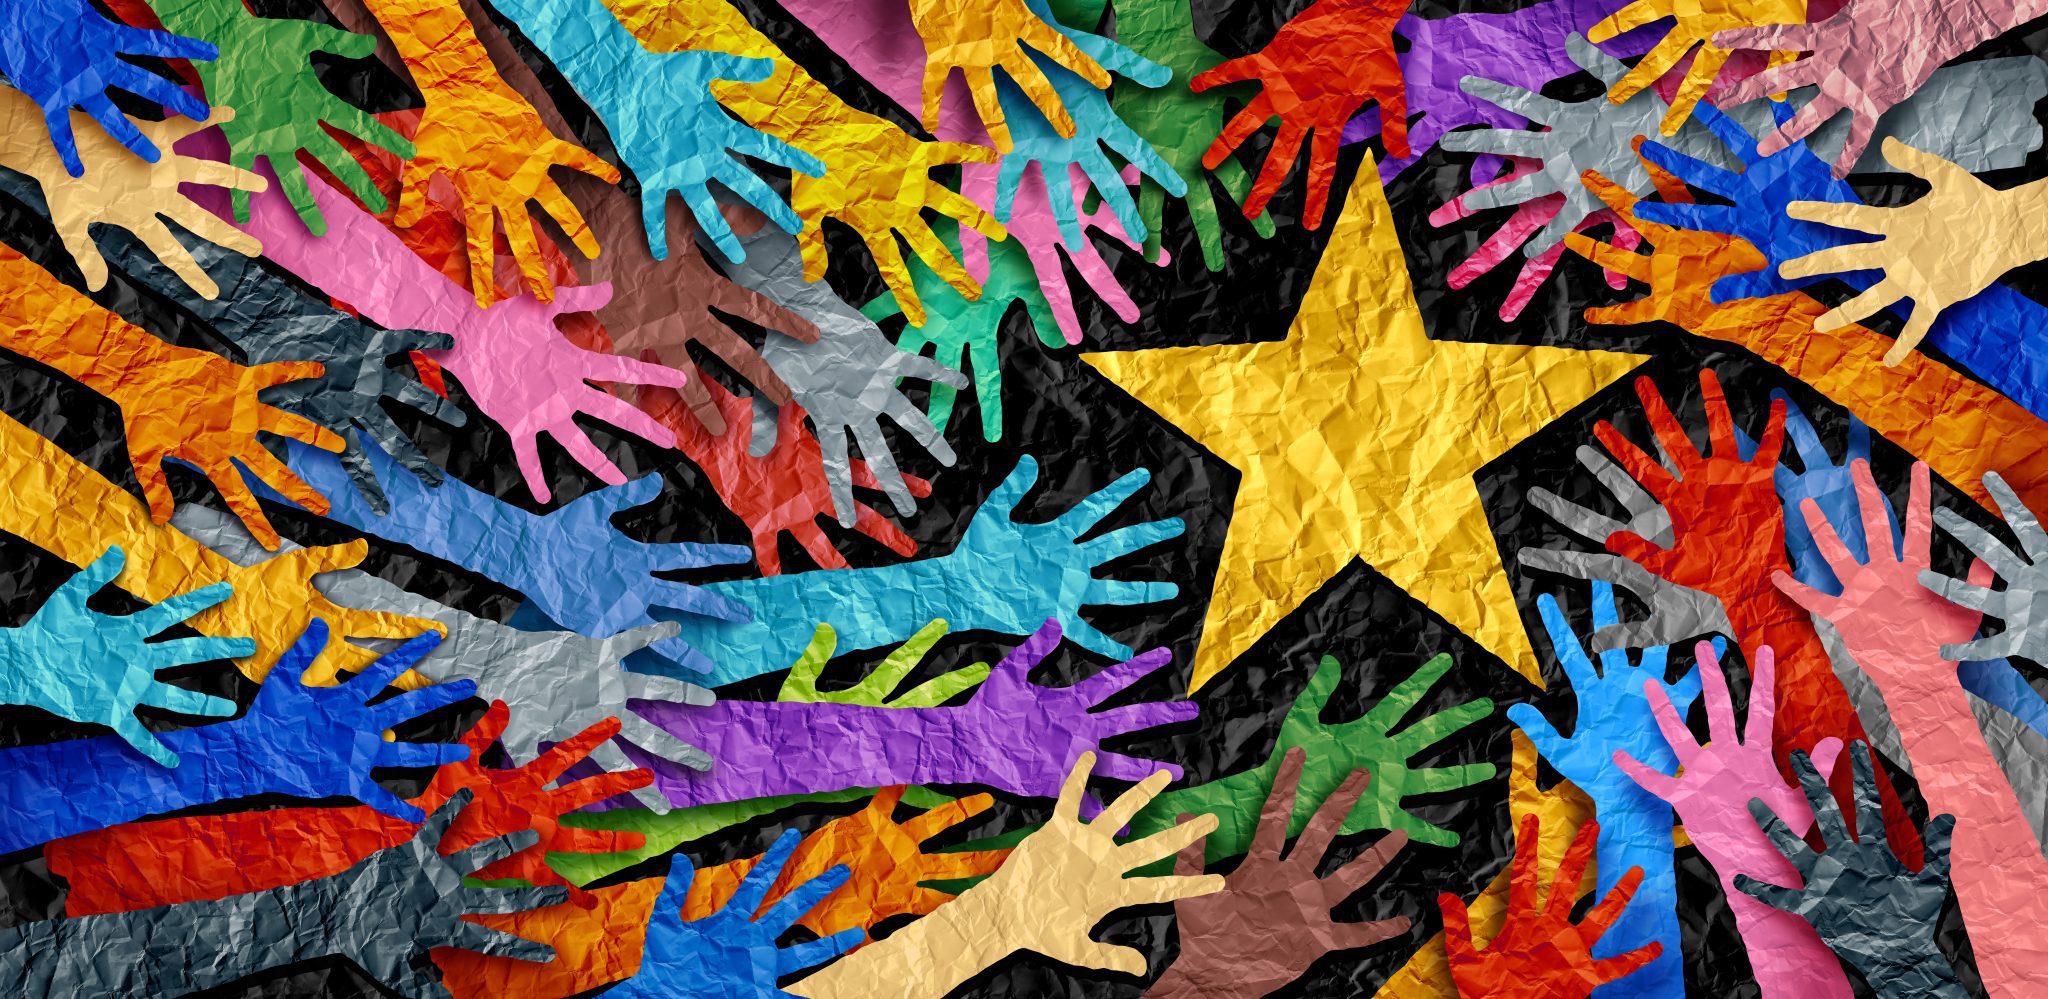 Illustrated hands of all colors reaching to a star in the middle of the picture.